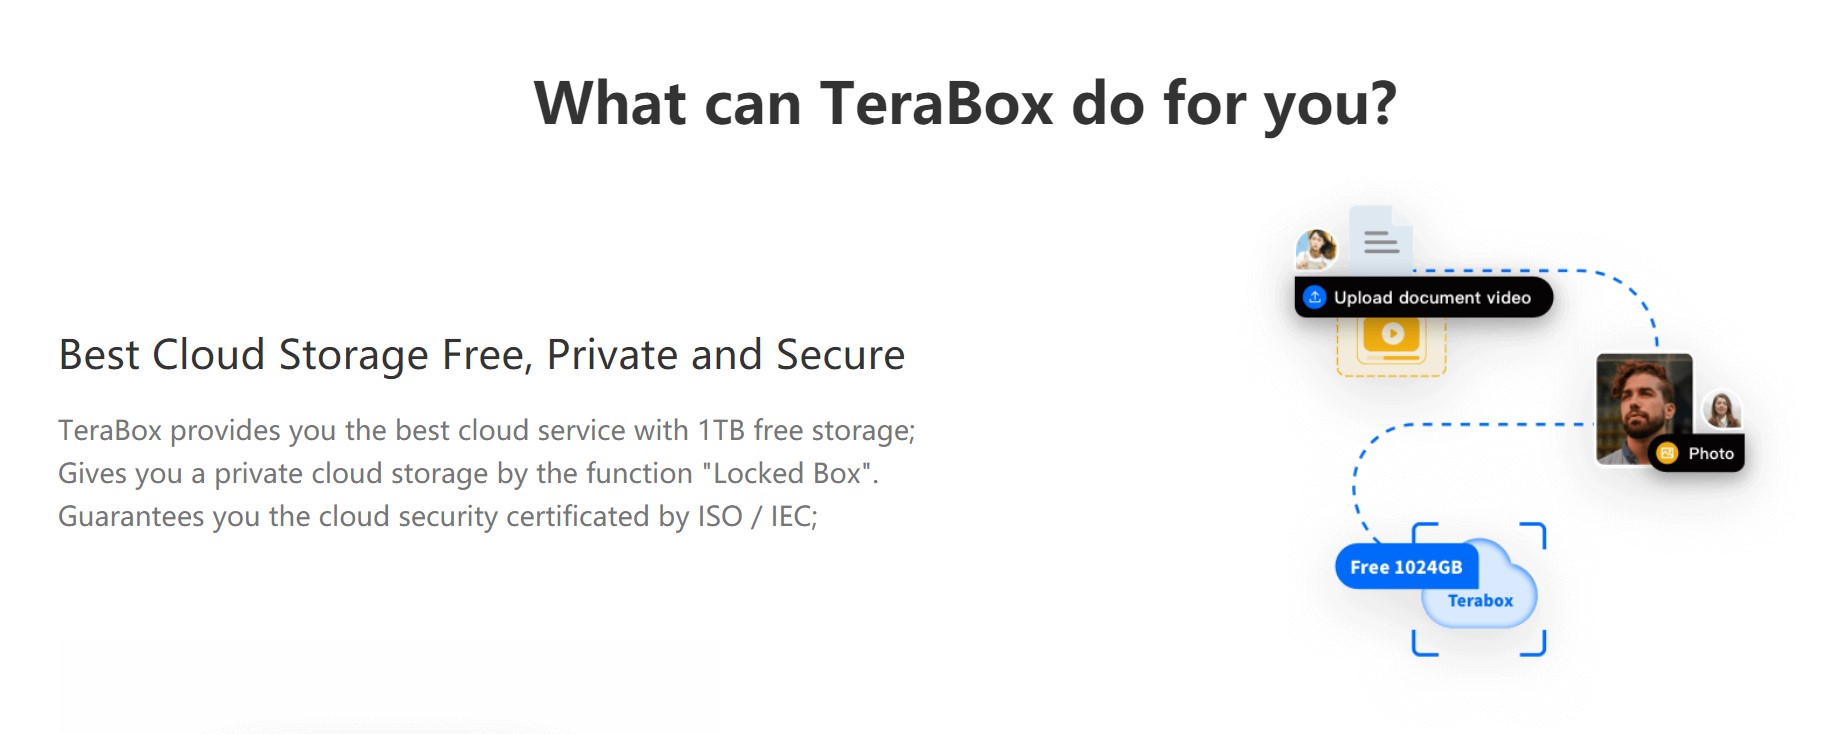 TeraBox - Provide You with Cloud App Security